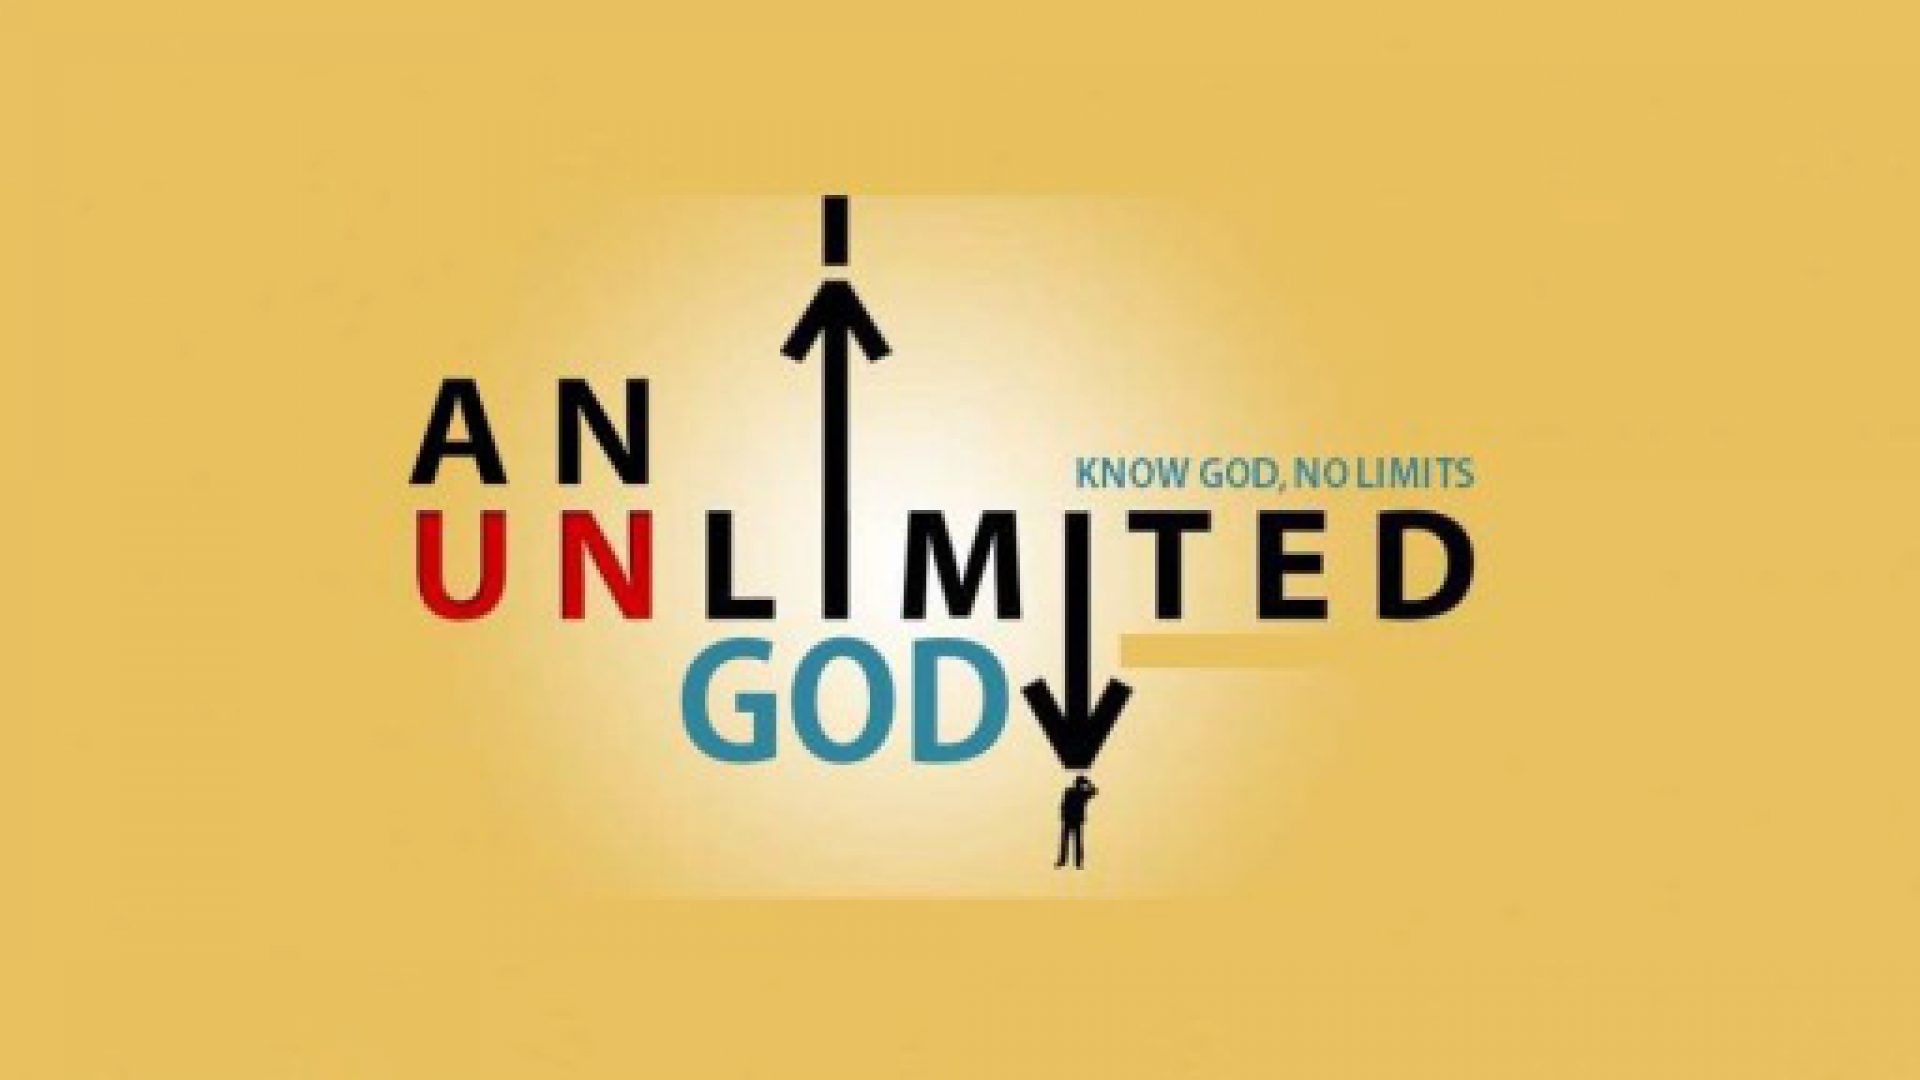 THE AN UNLIMITED GOD